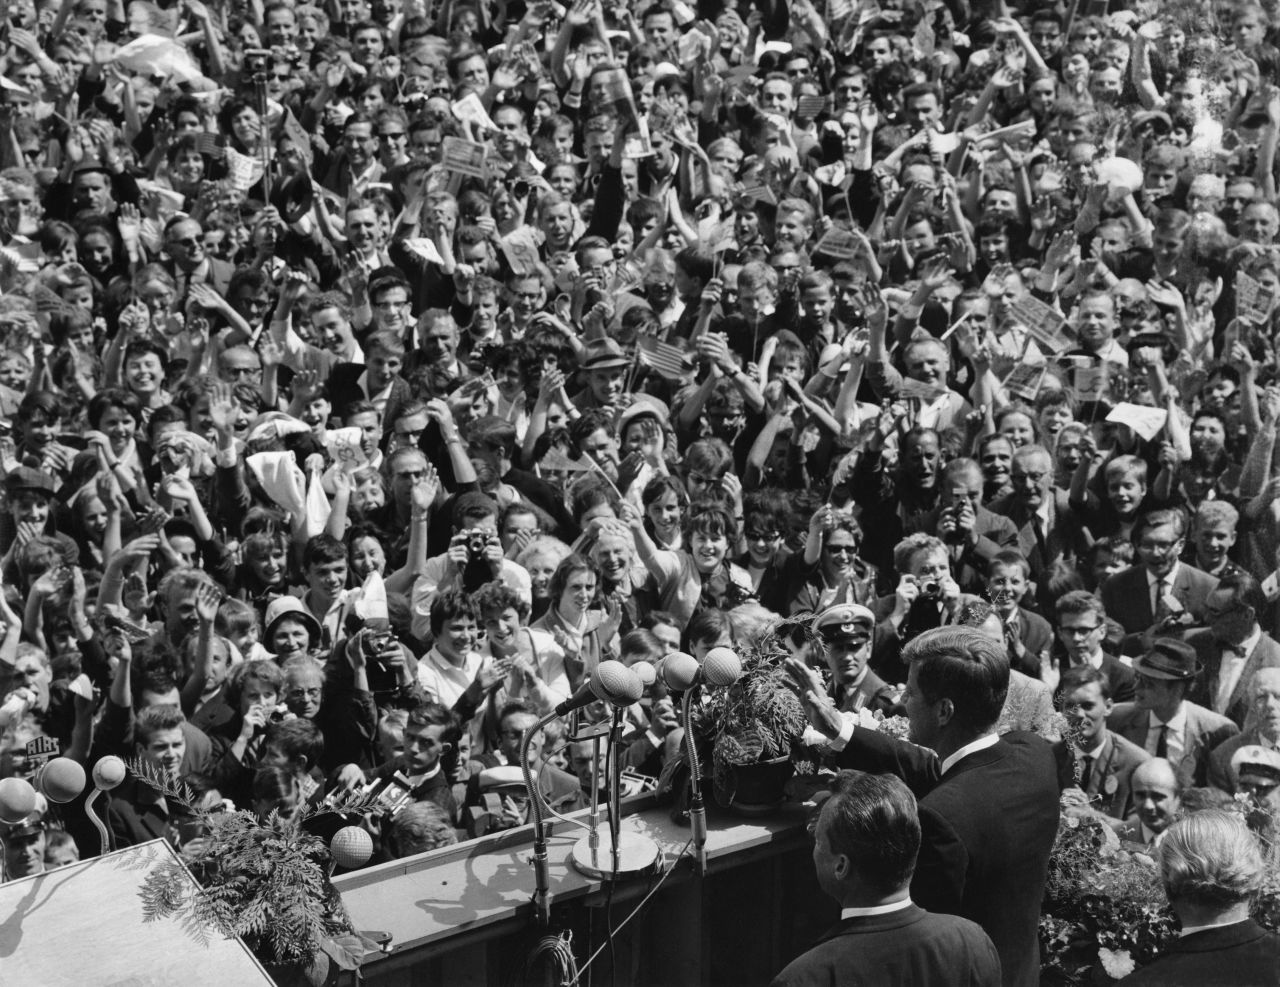 U.S. presidents have a long history of coming to Berlin. John F. Kennedy gave his famous "Ich bin ein Berliner" in front of a roaring crowd in West Berlin during a 1963 visit.